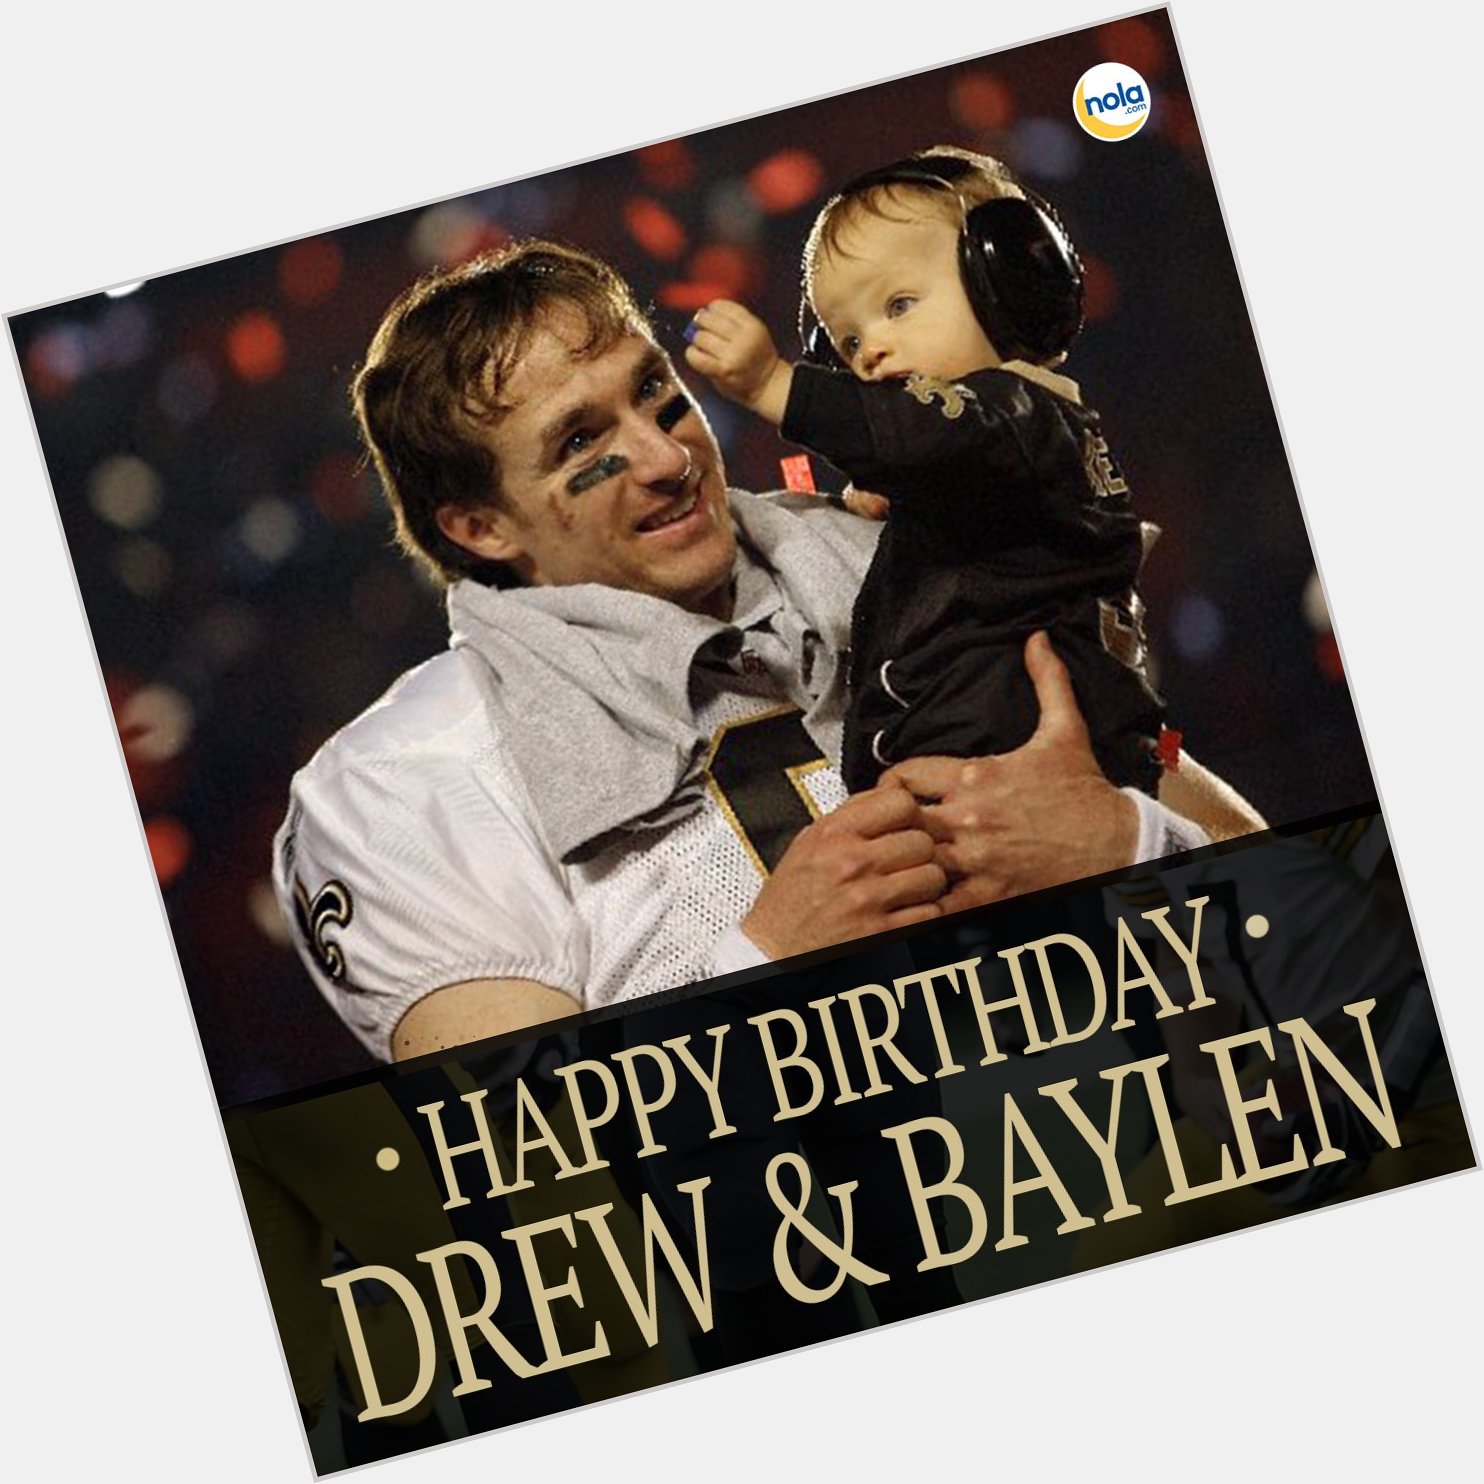 Did you know Drew Brees shares a birthday with his son, Baylen? Happy birthday, Drew and Baylen! 